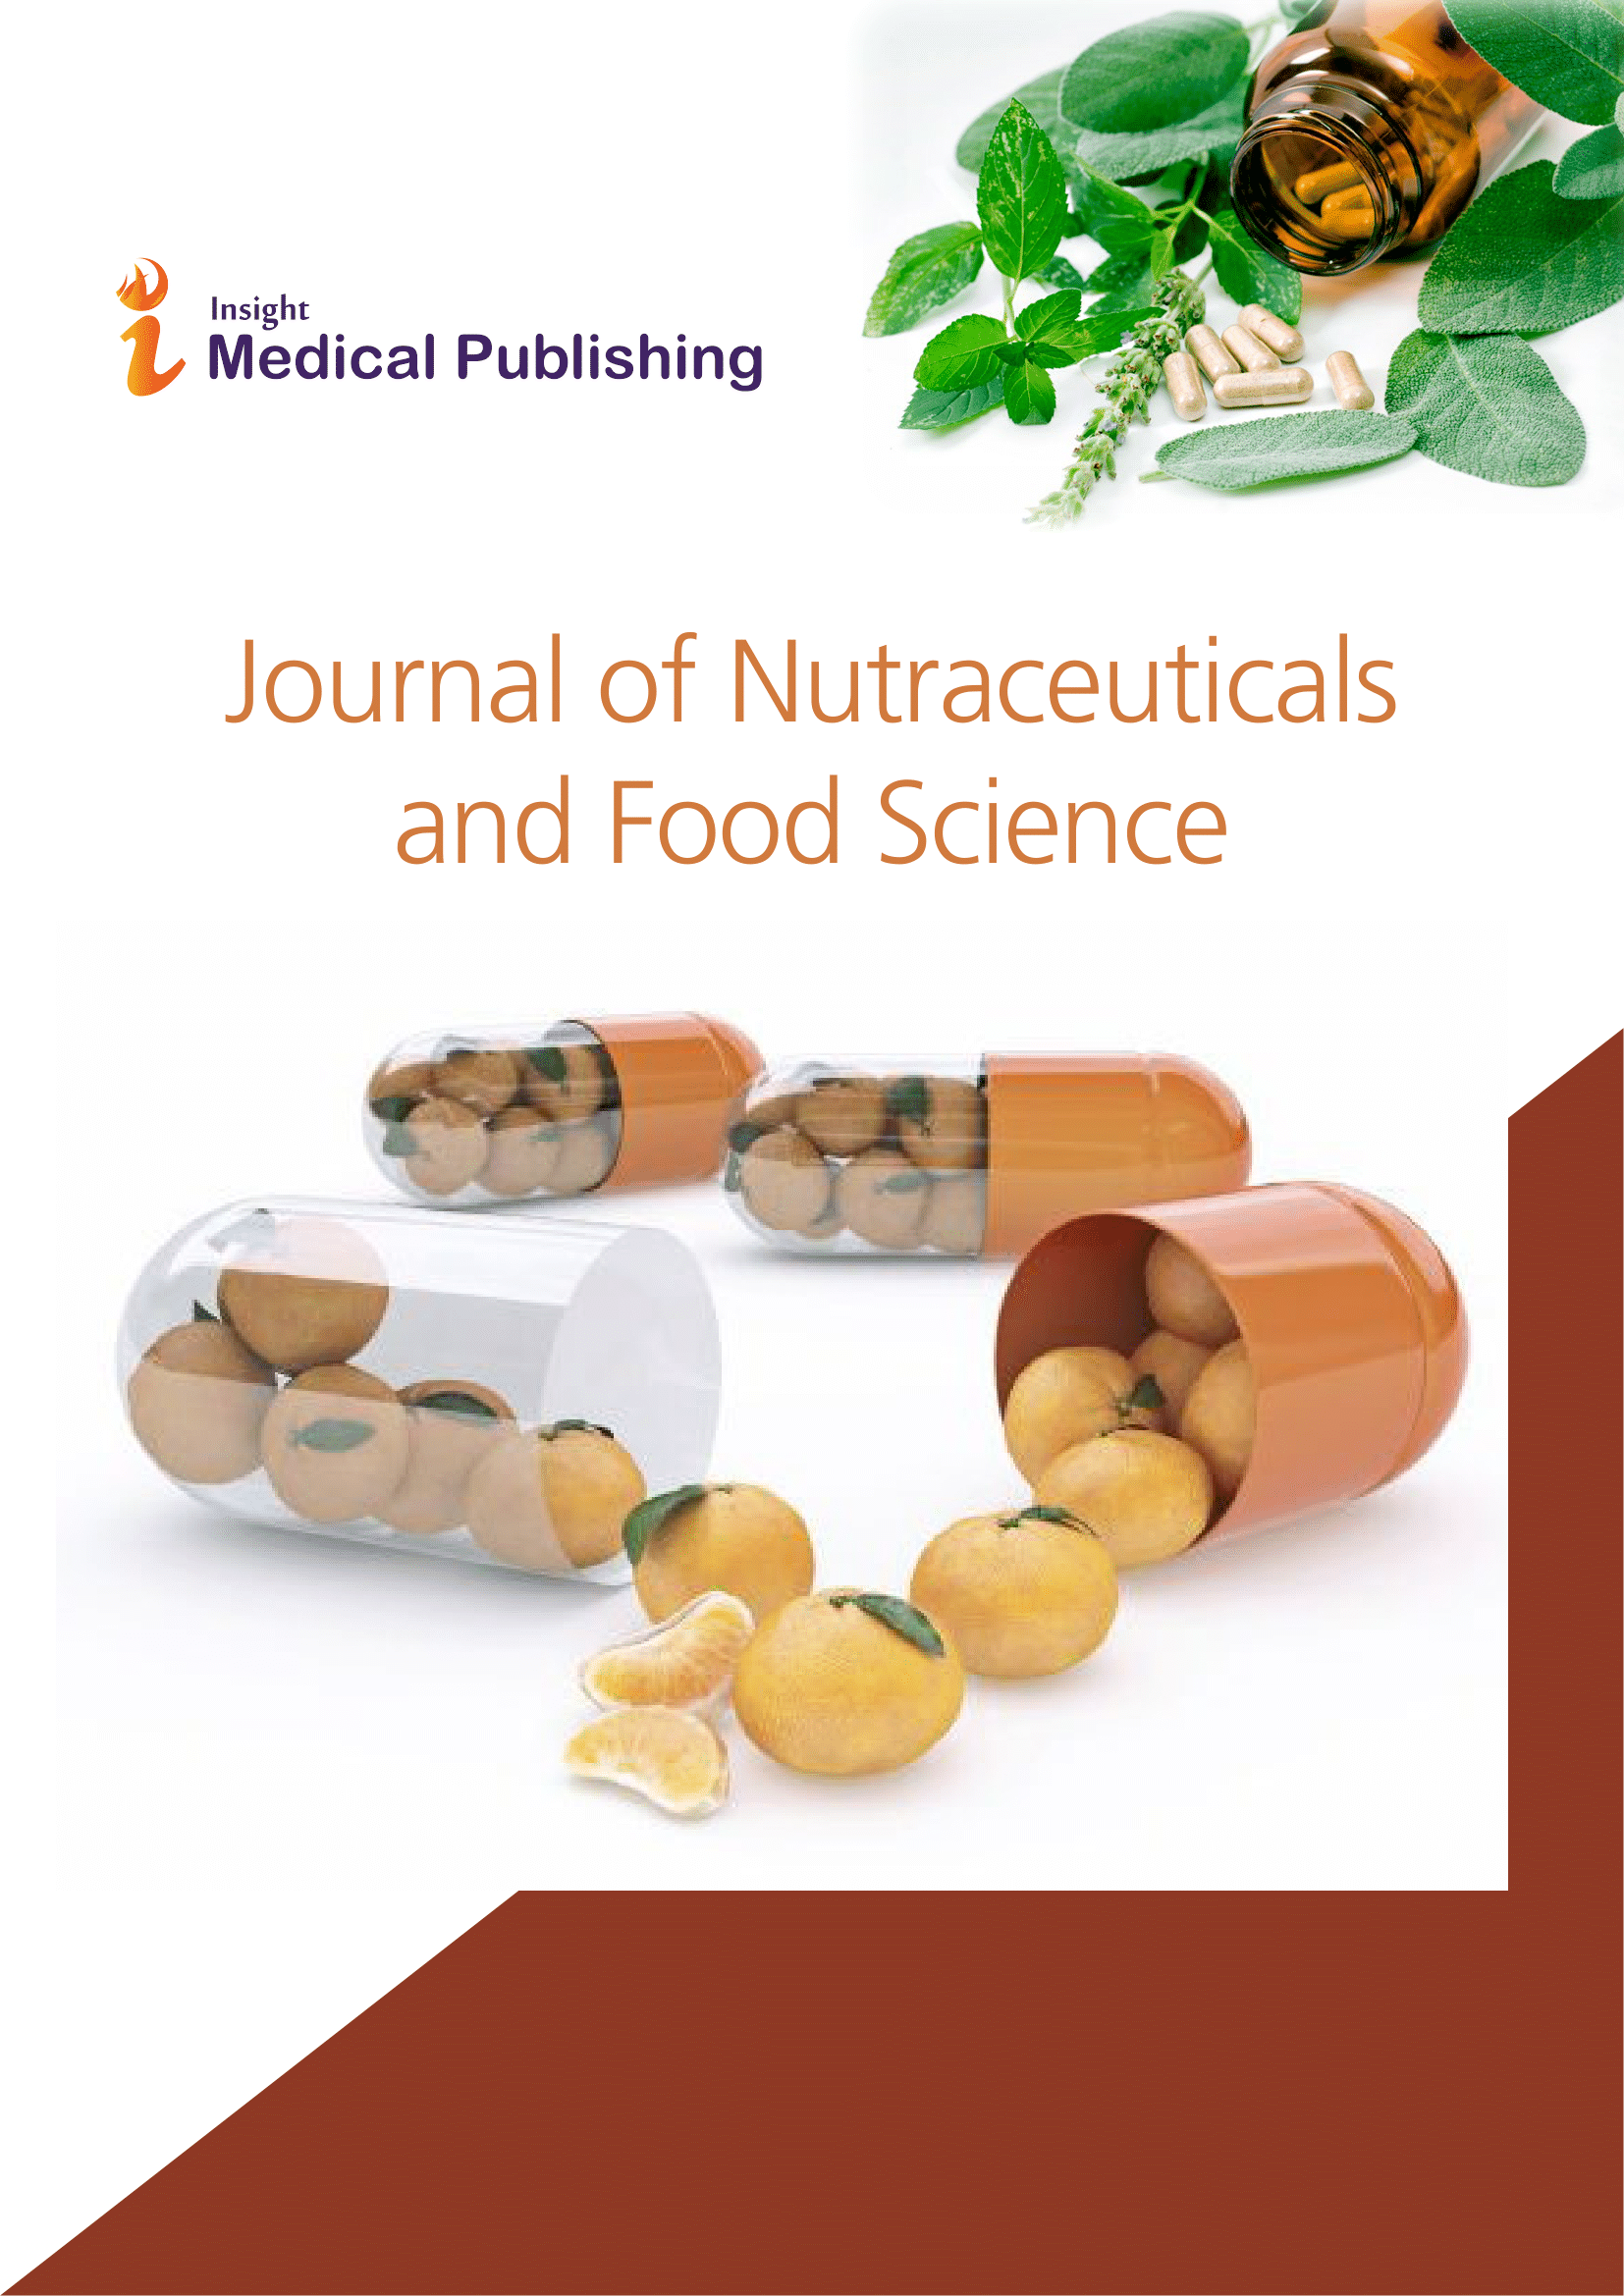 Journal of Nutraceuticals and Food Science